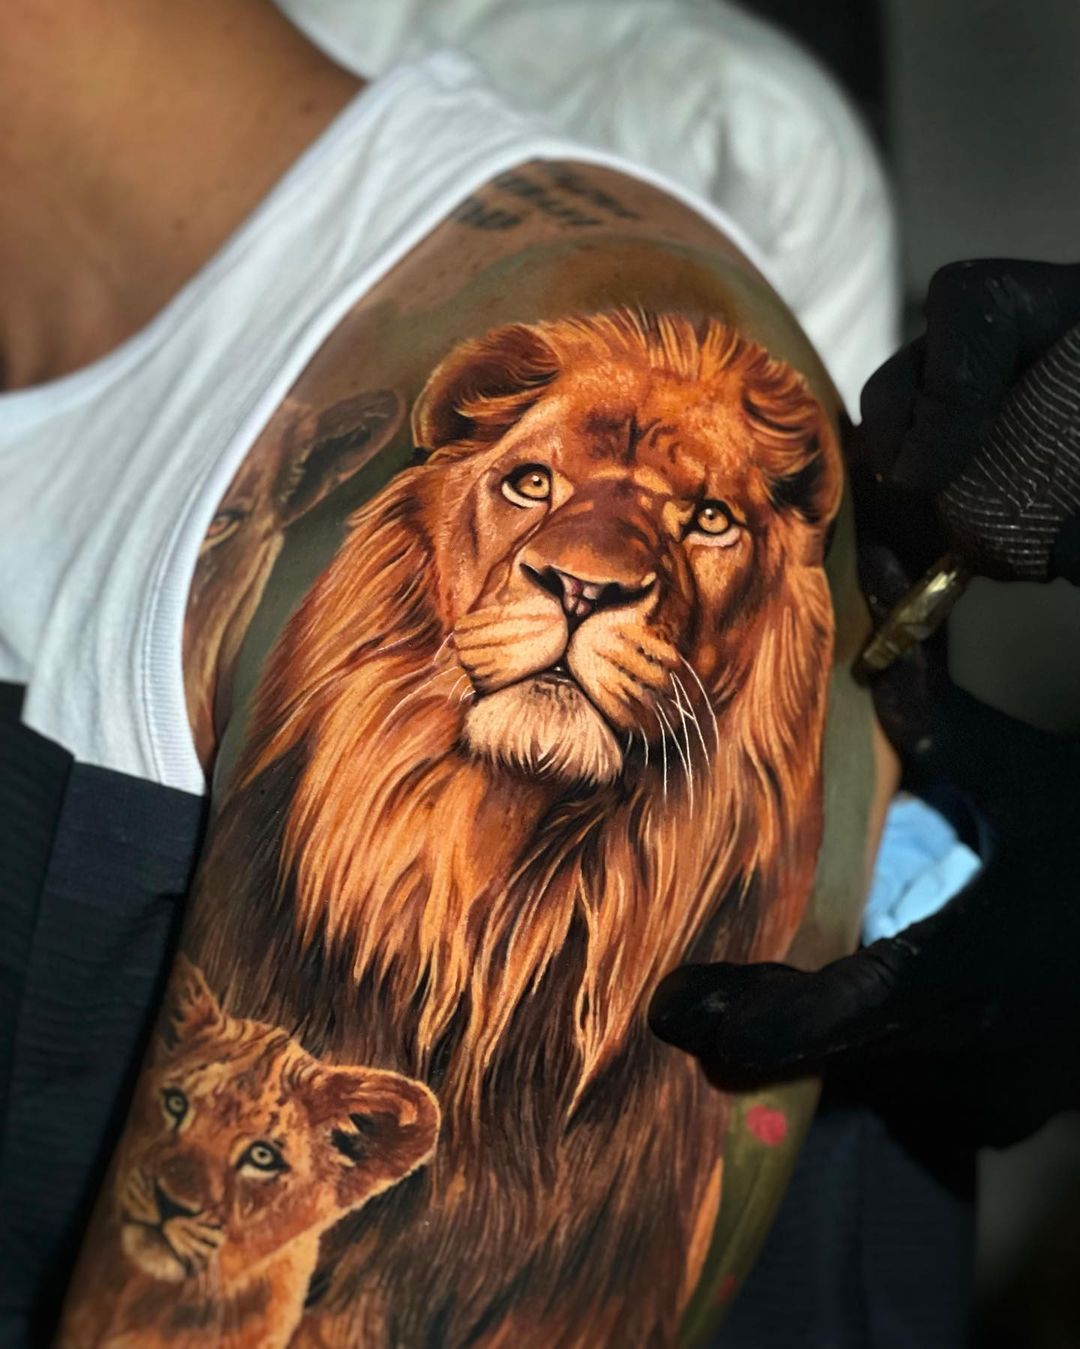 ISO Hyper Realism Tattoo Artist Im looking for the best of the best  Examples of what I consider the best are pictures posted If they arent  at this level or better Im